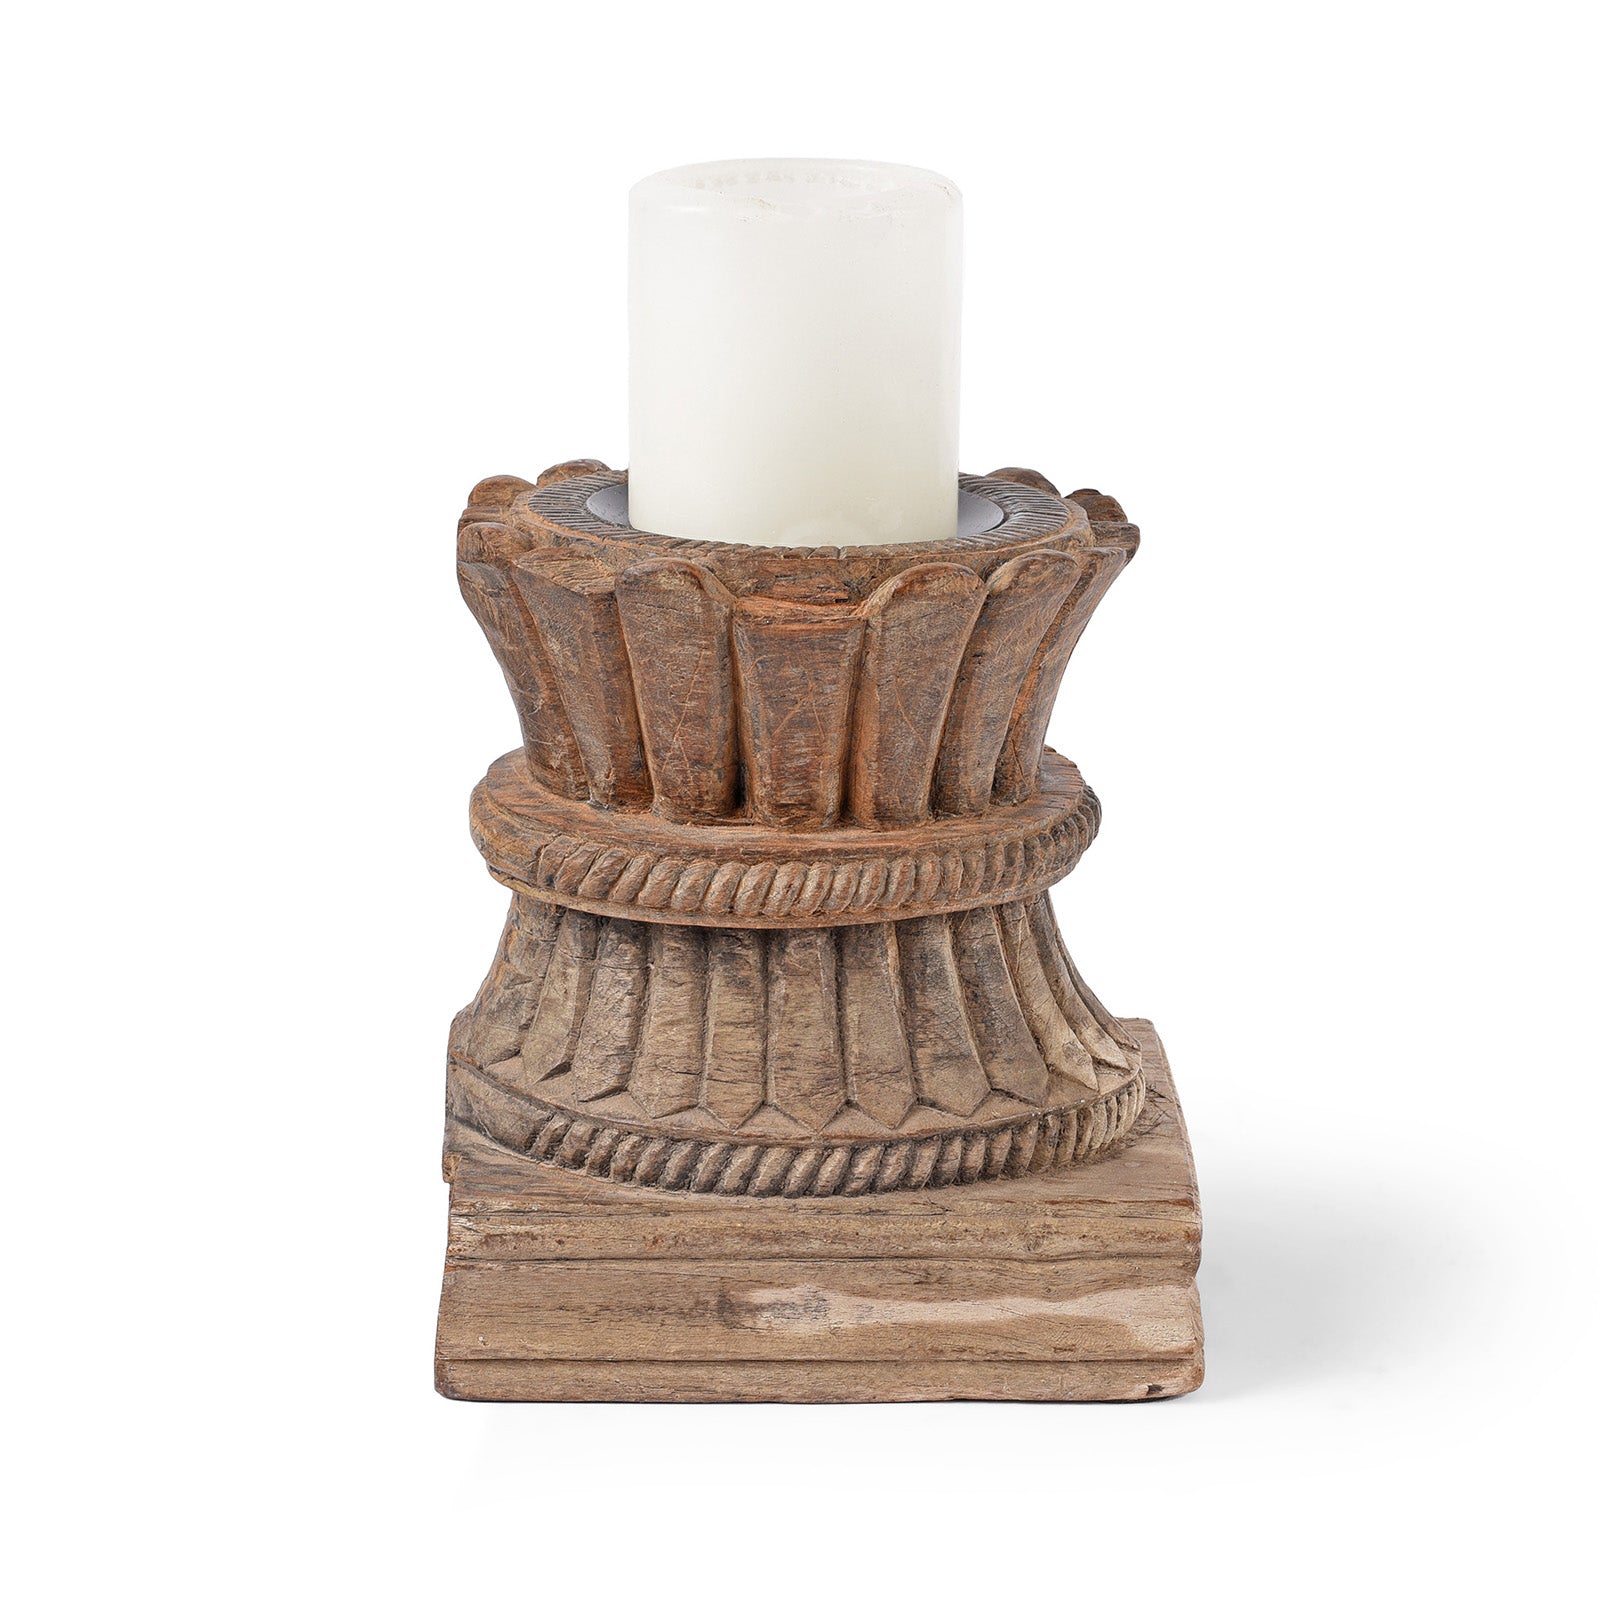 Candlestand Made From An Old Teak Carving | Indigo Antiques